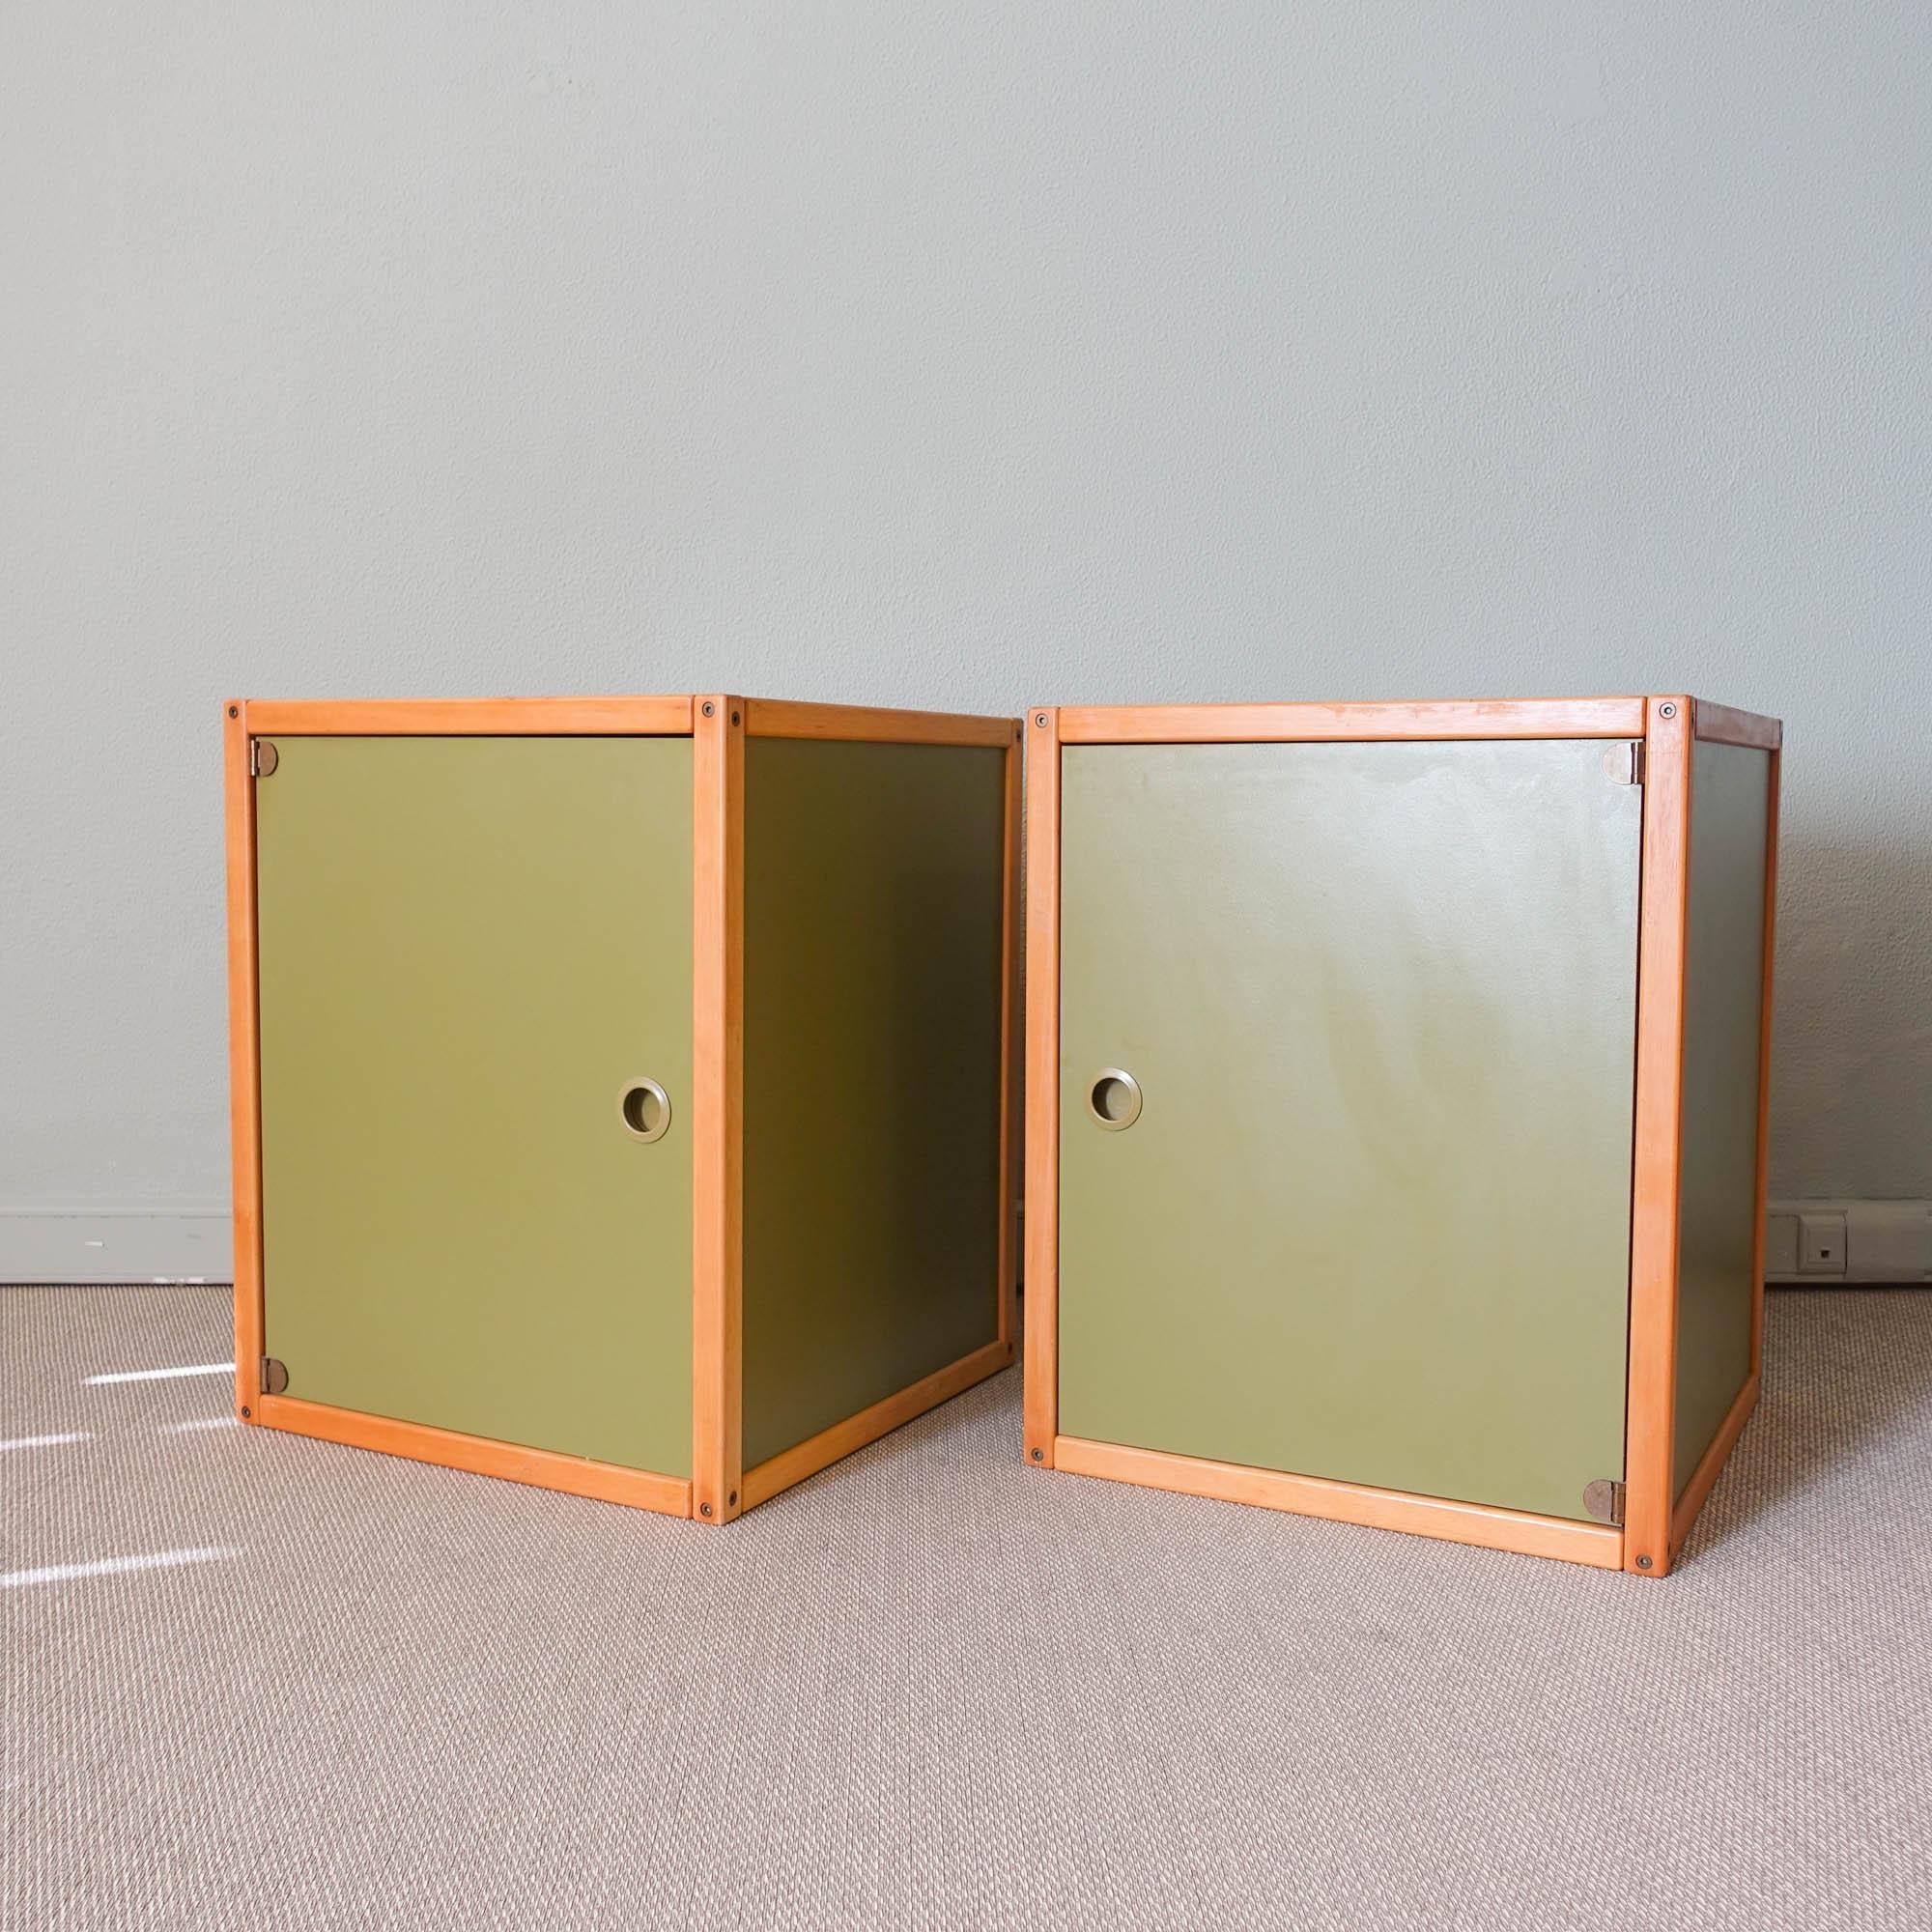 Pair of Vintage Profilsystem Collection Storage Units by Elmar Flötotto In Good Condition For Sale In Lisboa, PT